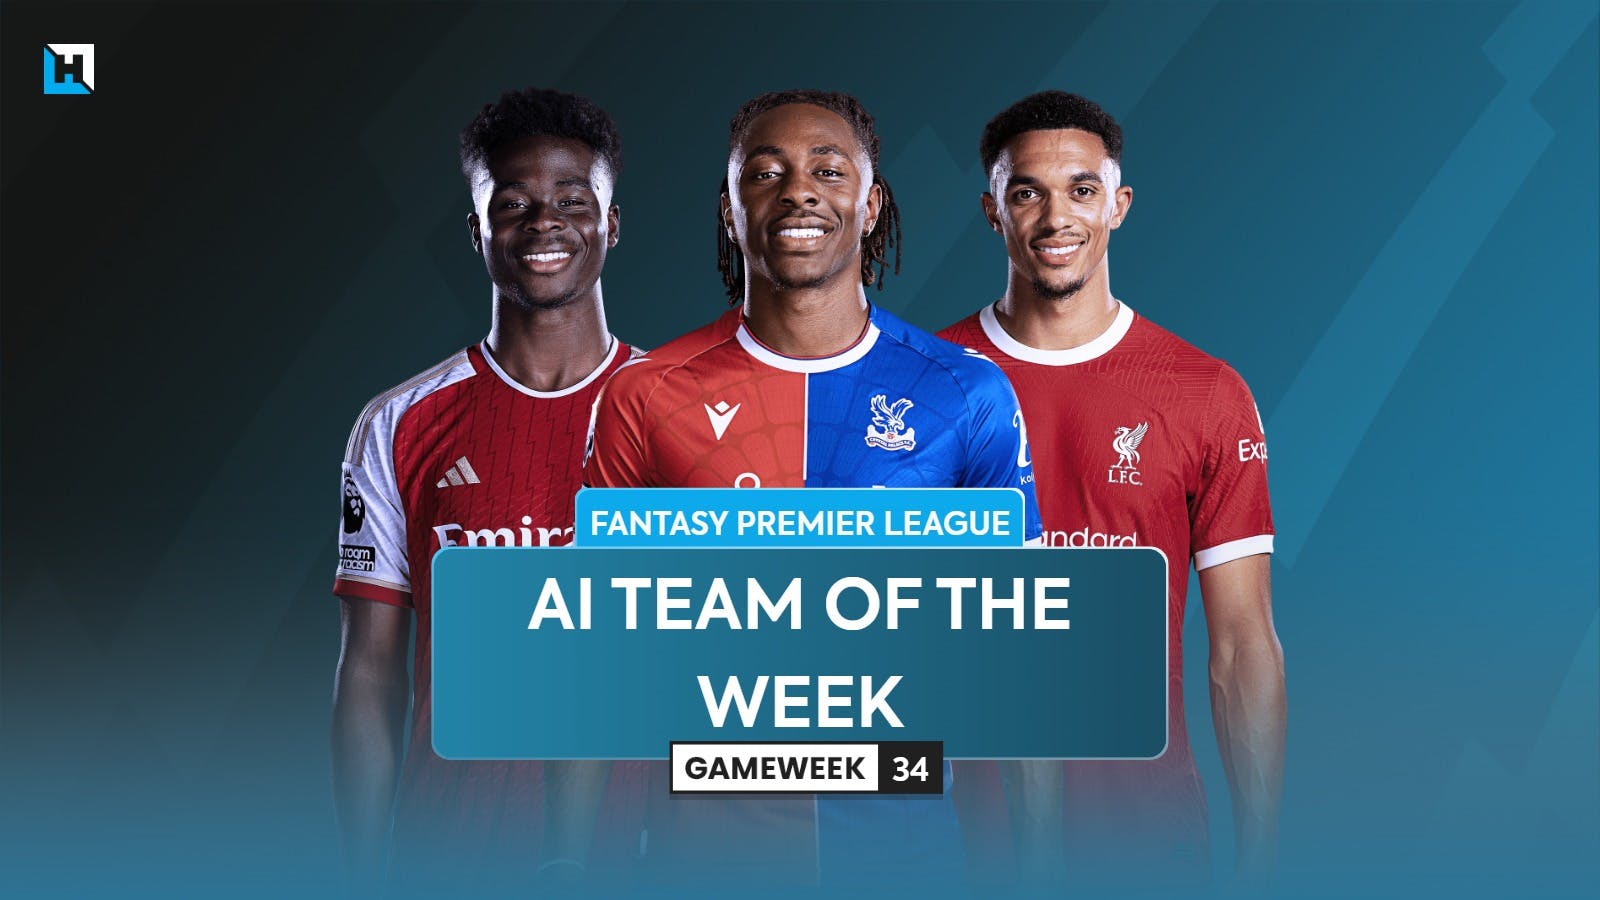 The best FPL team for Double Gameweek 34 according to Hub AI